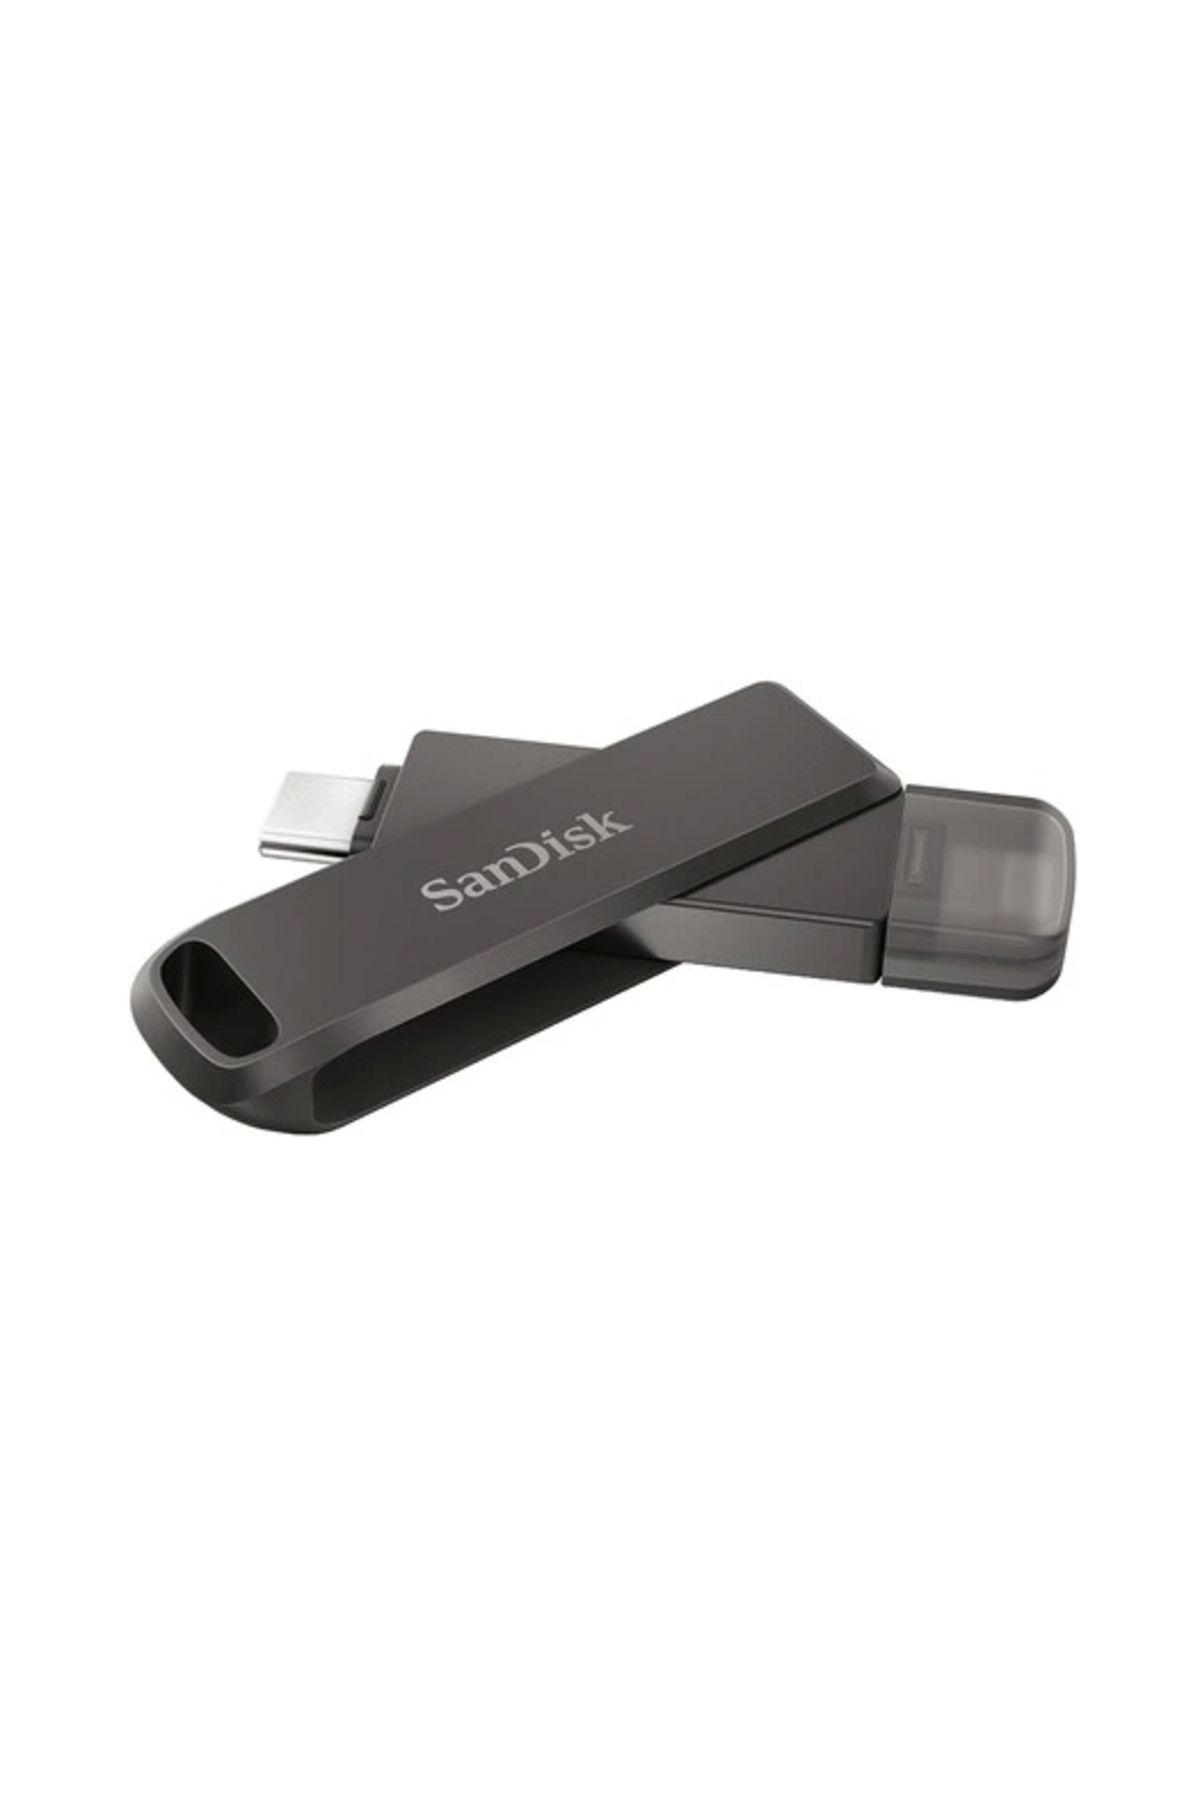 Sandisk Ixpand Flash Drive Luxe 64gb - Type-c